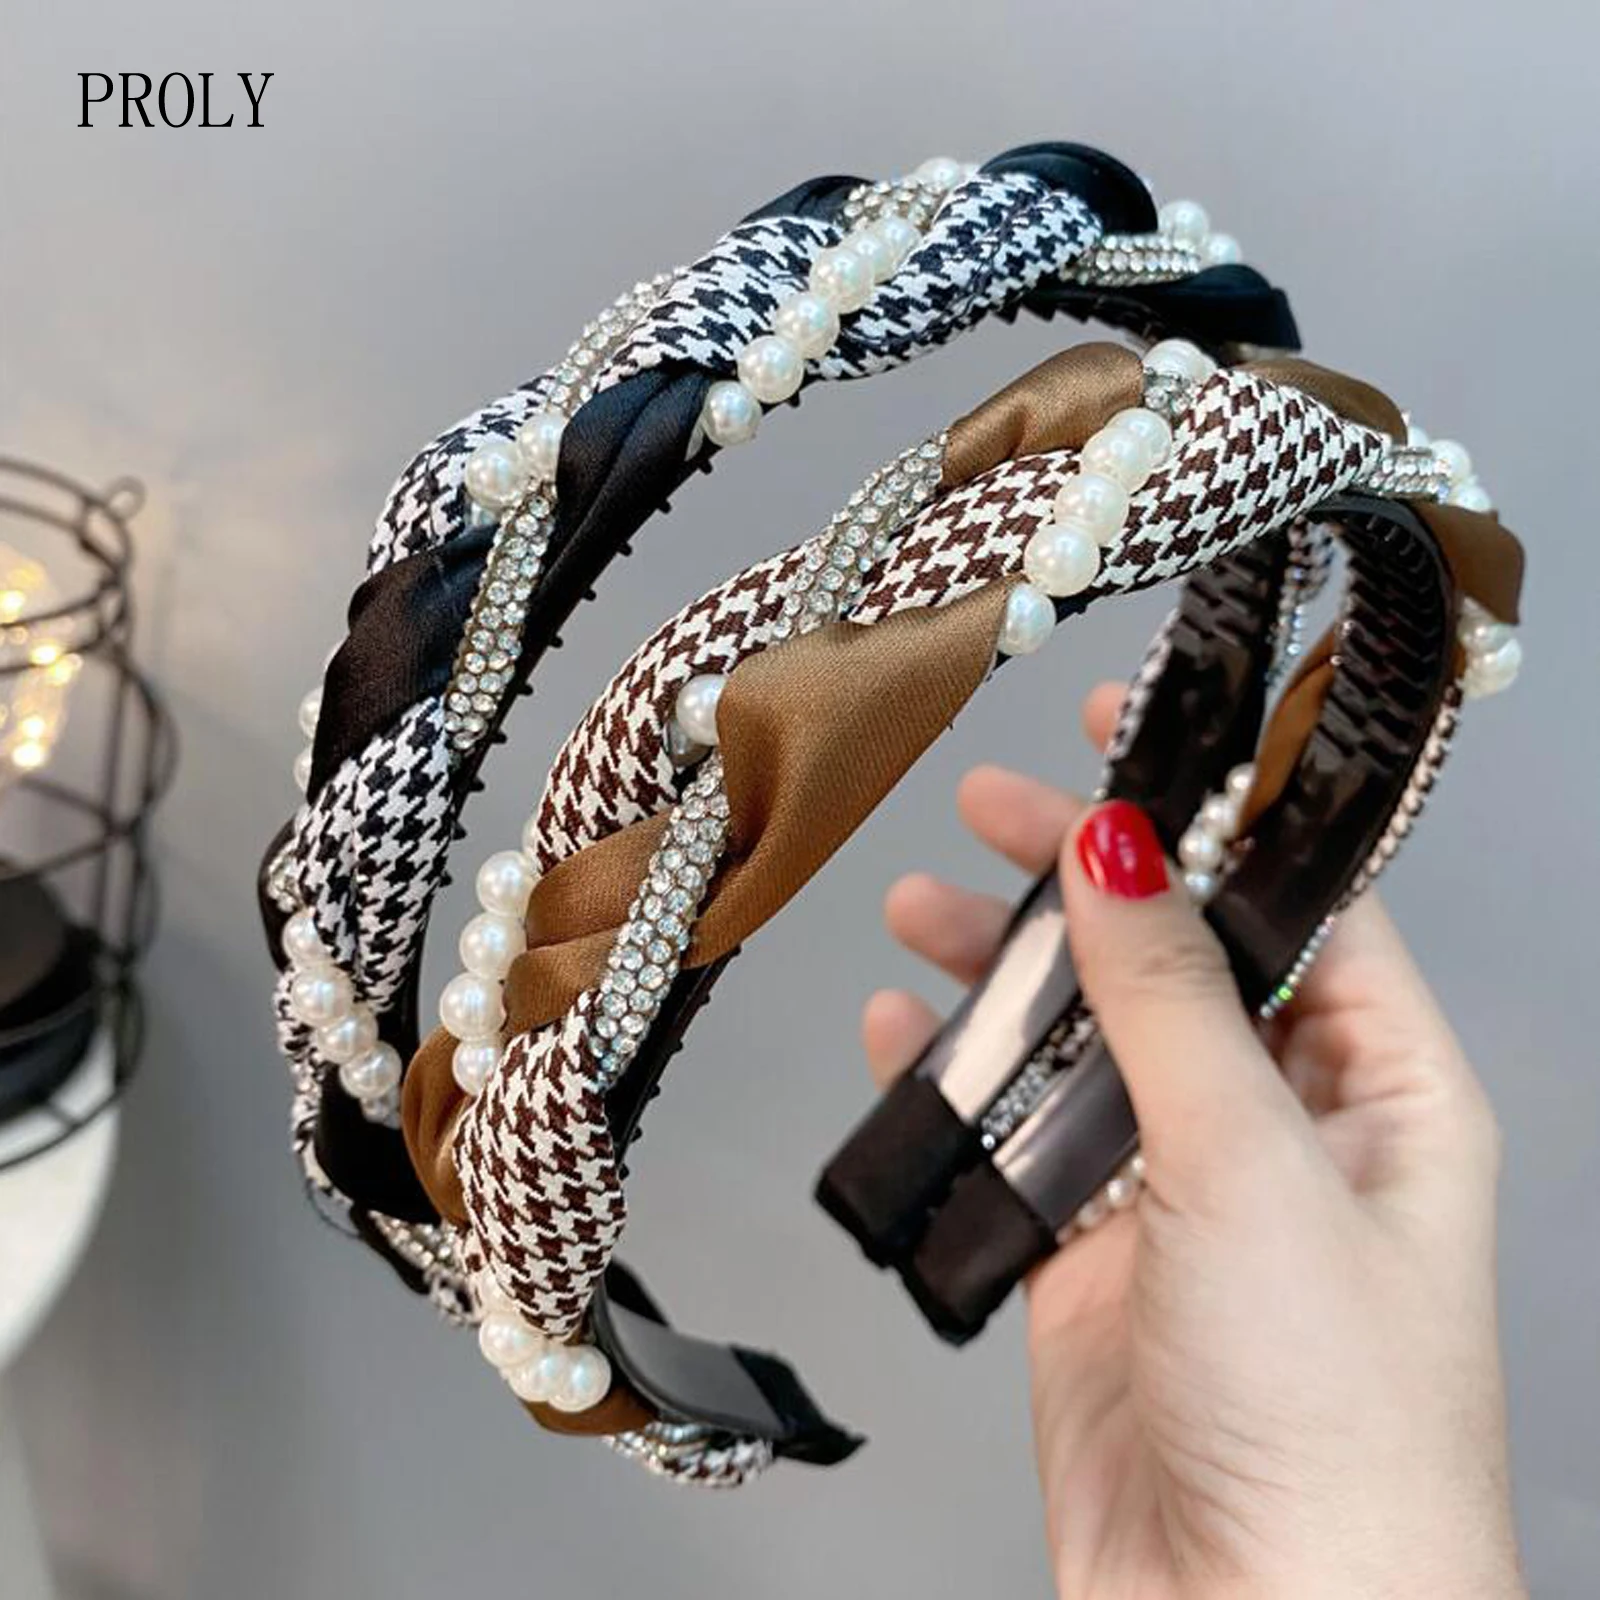 

PROLY New Fashion Women Hair Accessories Multi-layer Cloth Headband Top Quality Pearls Hairband Adult Turban Wholesale